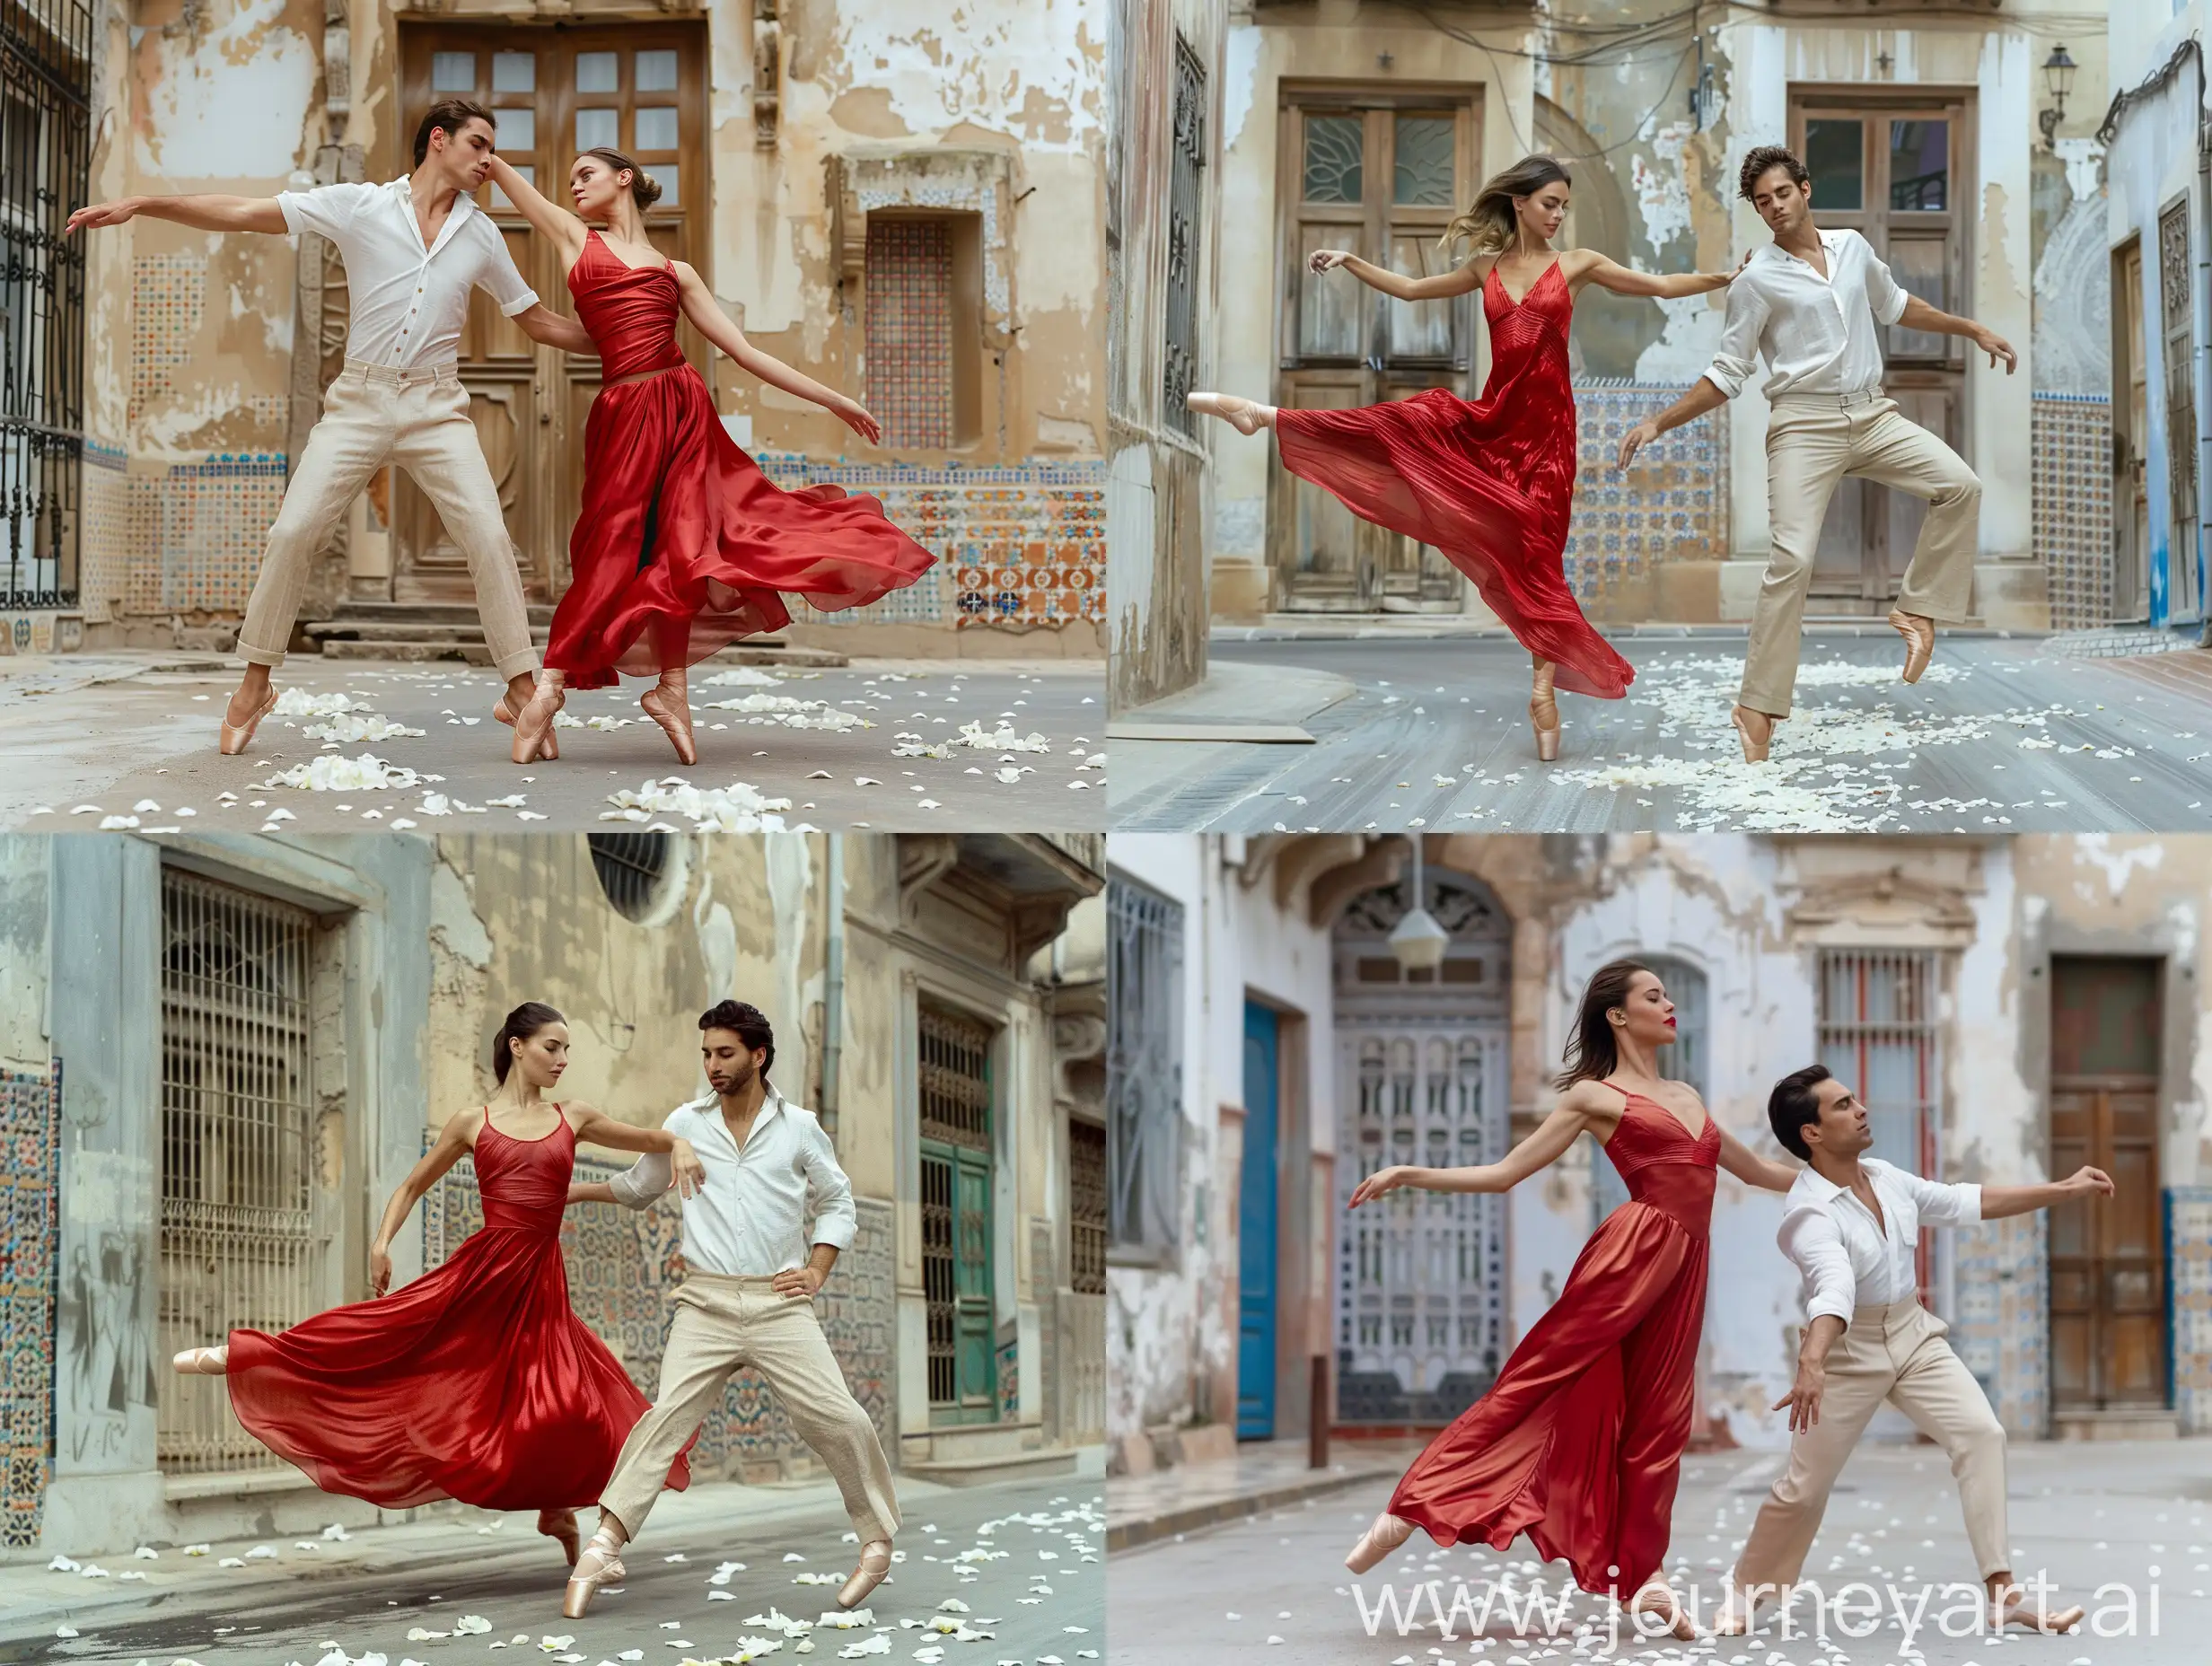 In front of an old French building with Tunisian tiles. On an empty street, w Contemporary female ballet dancer dressed in silky red dress dancing with a male dancer wearing beige pants and white linen shirt. The female dancer is thin tall and graceful. the most is moderatly robust. Both dancing on a tchakovsky music. An effect on the wall like the AI installation of Refik Anadol. The overall vibe is poetic pastel. on the ground of the streeet jasmin and neroli white petals on which the dancers are dancing. The scene films like 35mm film, somehow sofia coppola style. Very Extreme Wide shots. From far